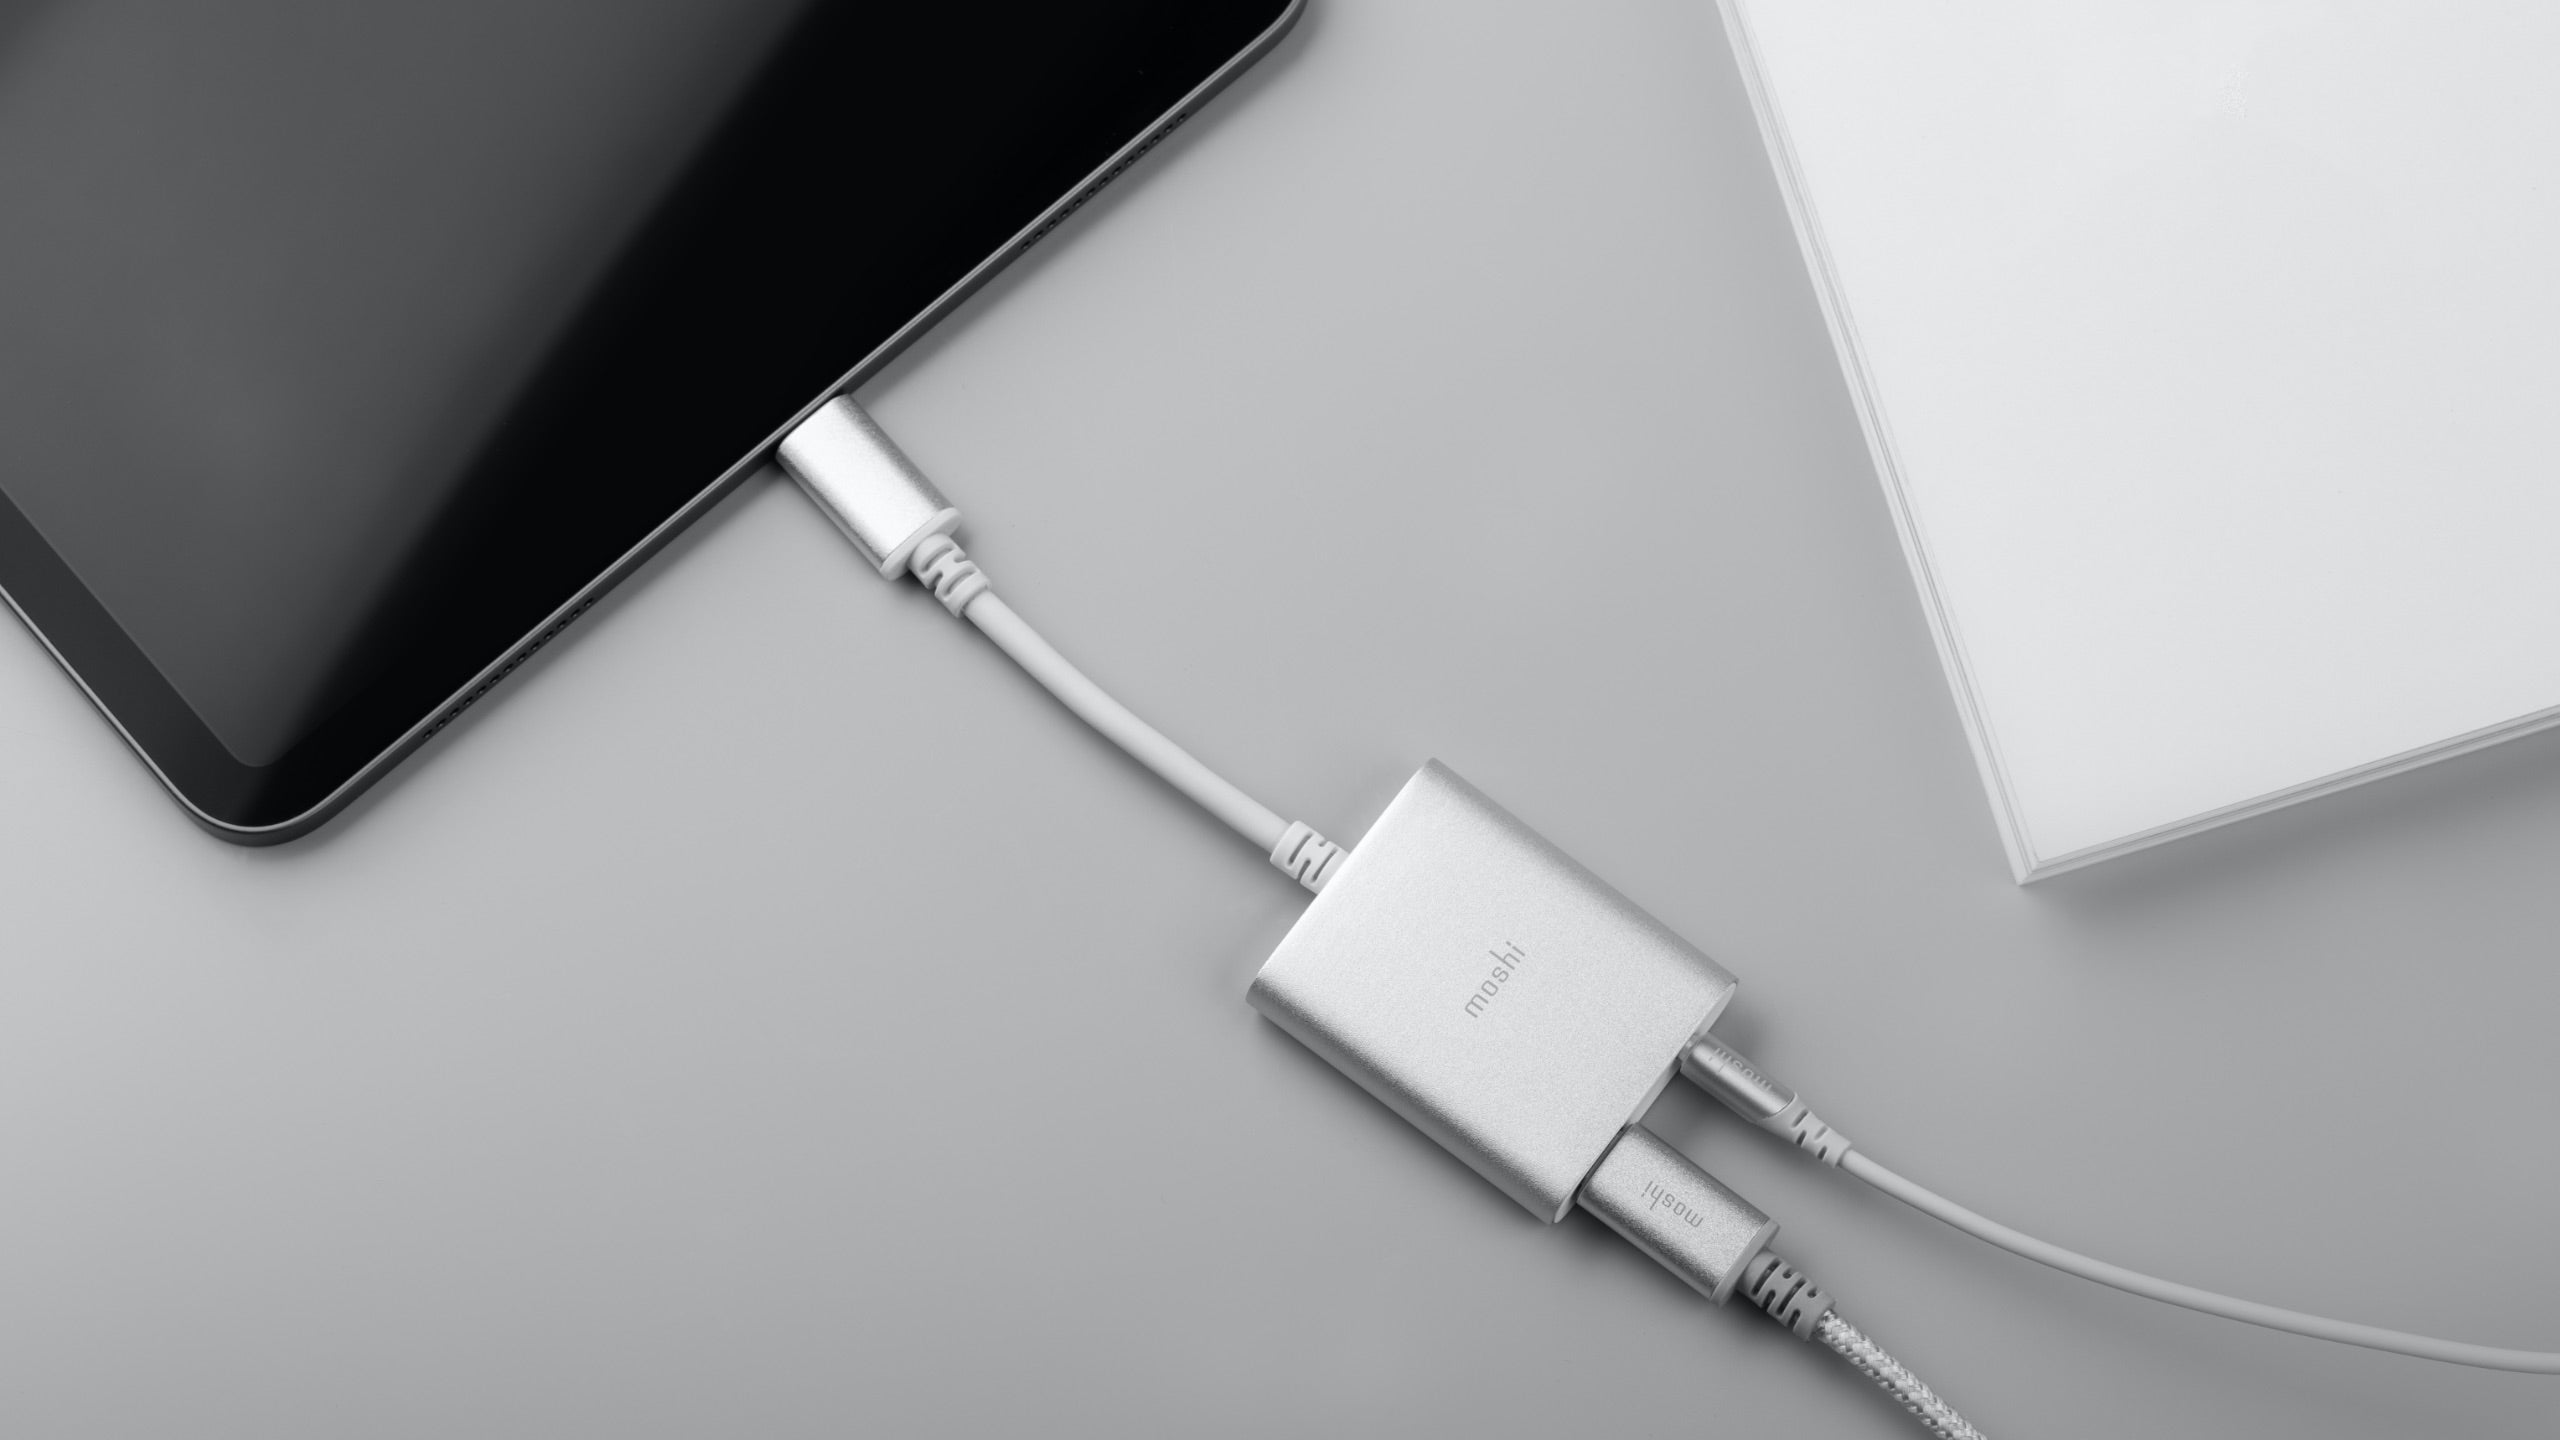 USB-C to Audio Jack, with Pass-Through USB-C and PD Charging